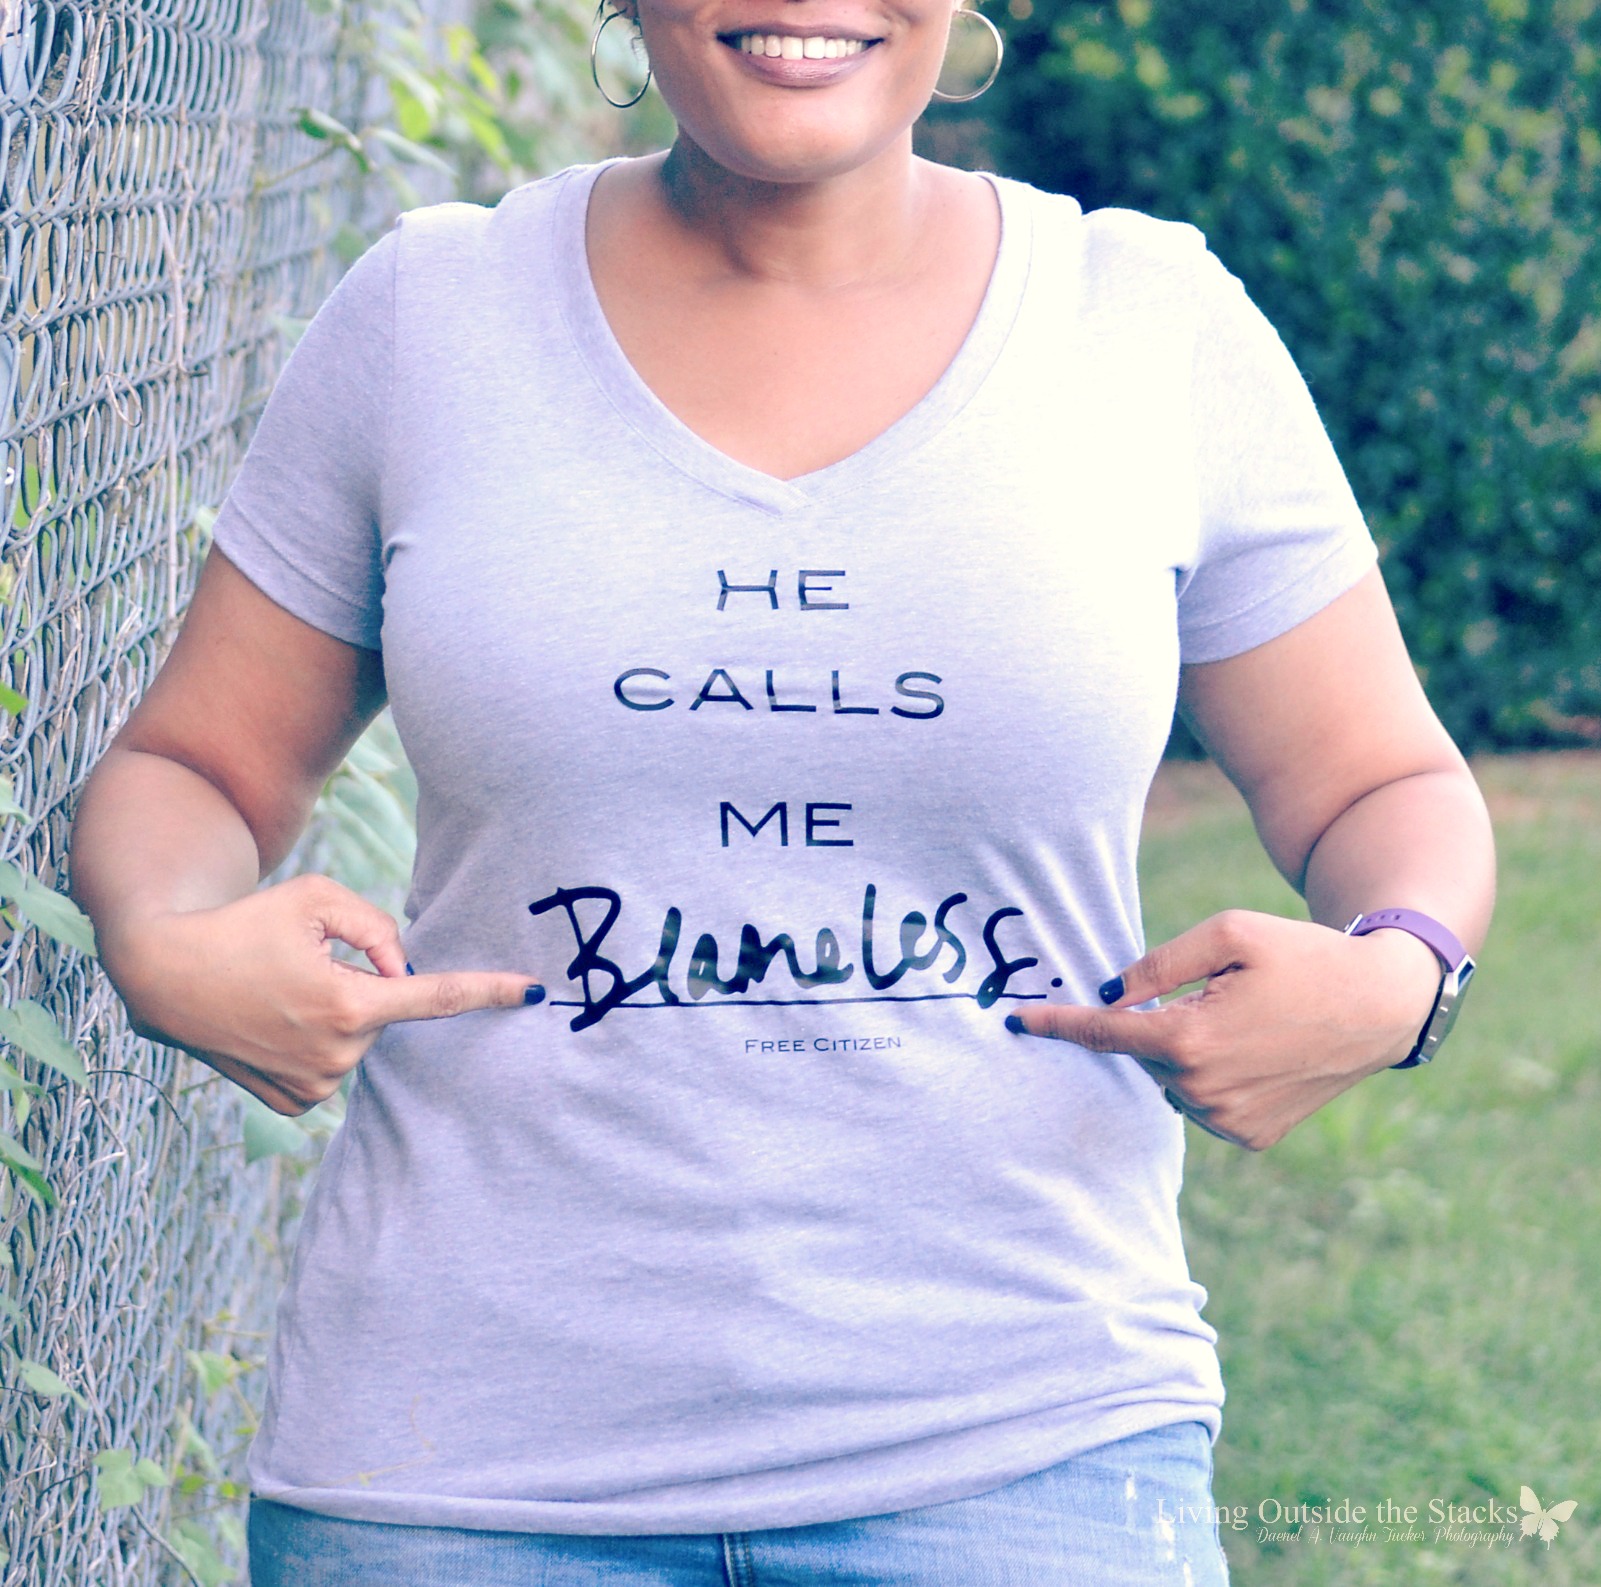  He Calls Me Tee by Free Citizen {living outside the stacks} #FreeCitizen #livefree #JesusGirl